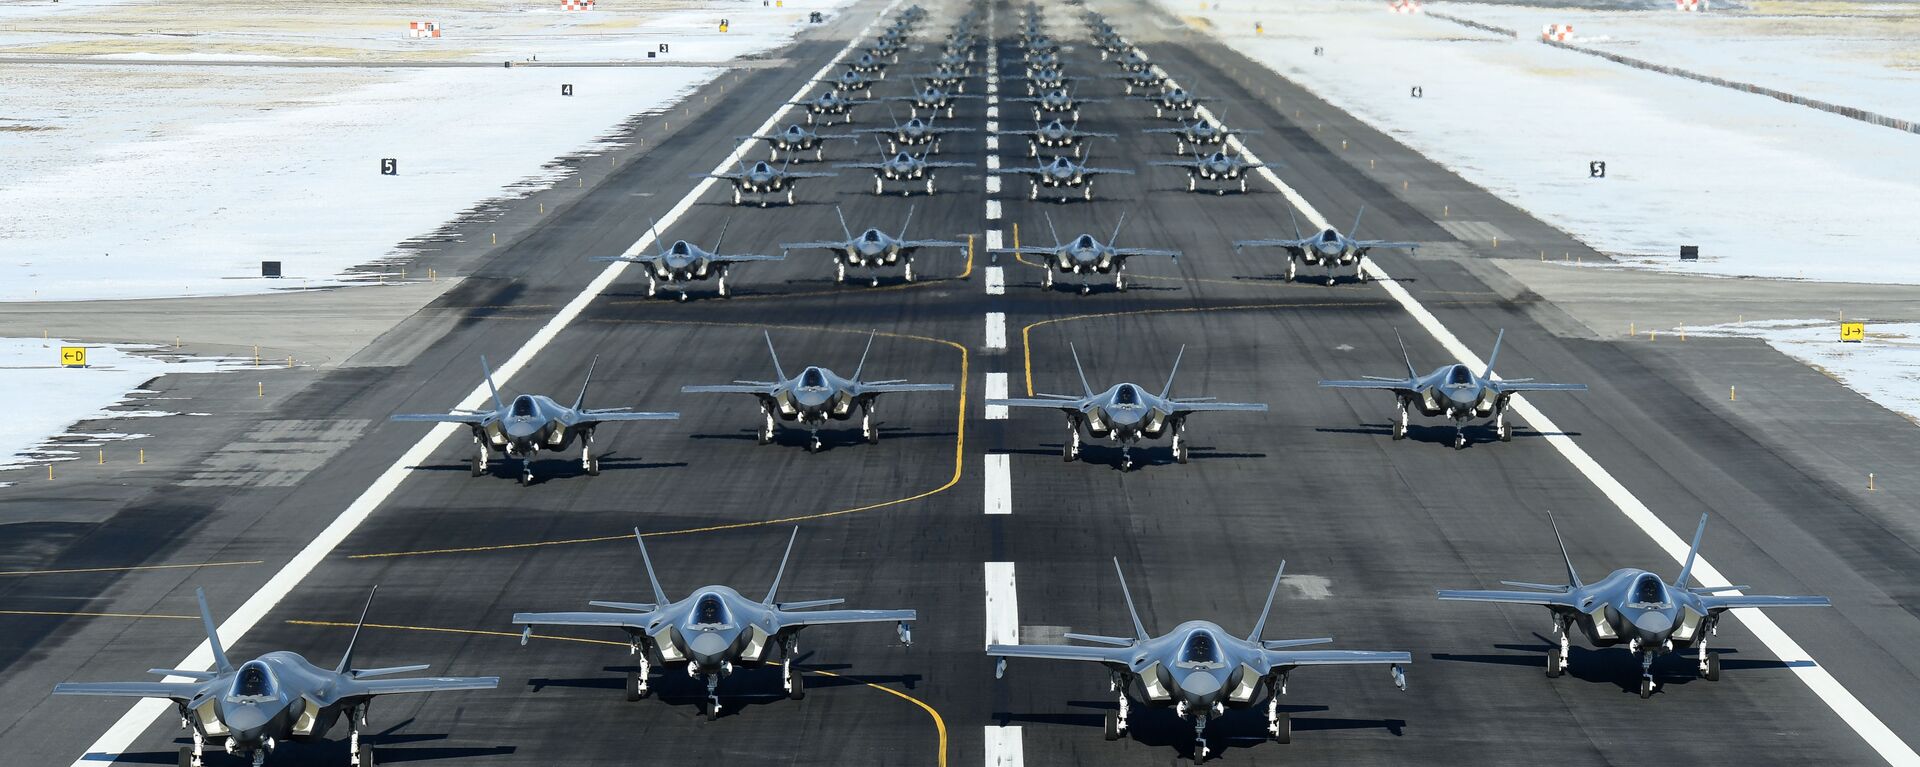 The active duty 388th and Reserve 419th Fighter Wings conducted an F-35A Combat Power Exercise at Hill Air Force Base, Utah, Jan. 6, 2020.  - اسپوتنیک افغانستان  , 1920, 10.08.2022